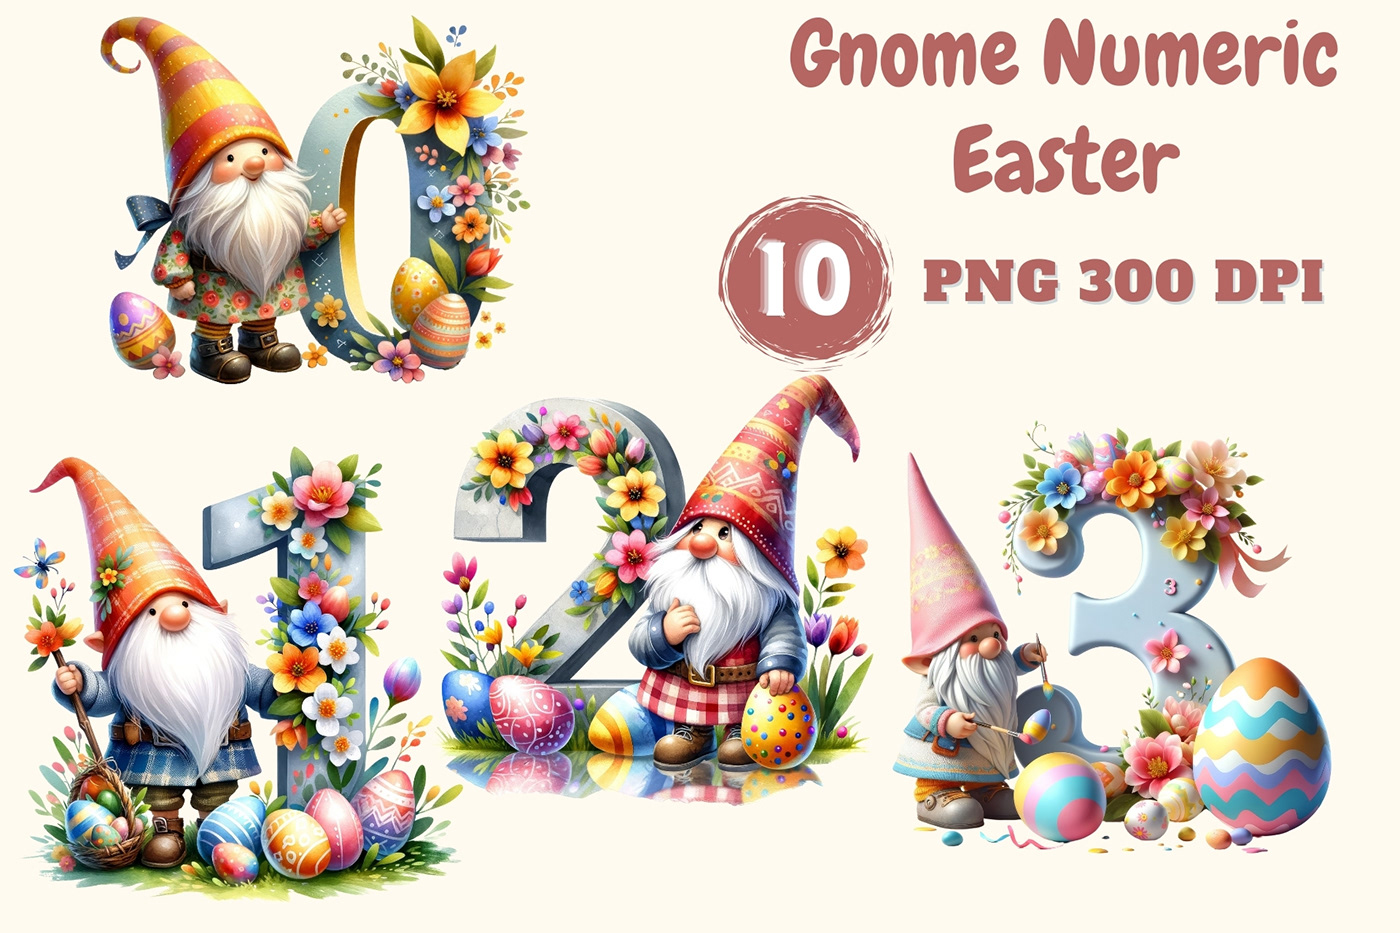 gnome numbers Easter watercolor